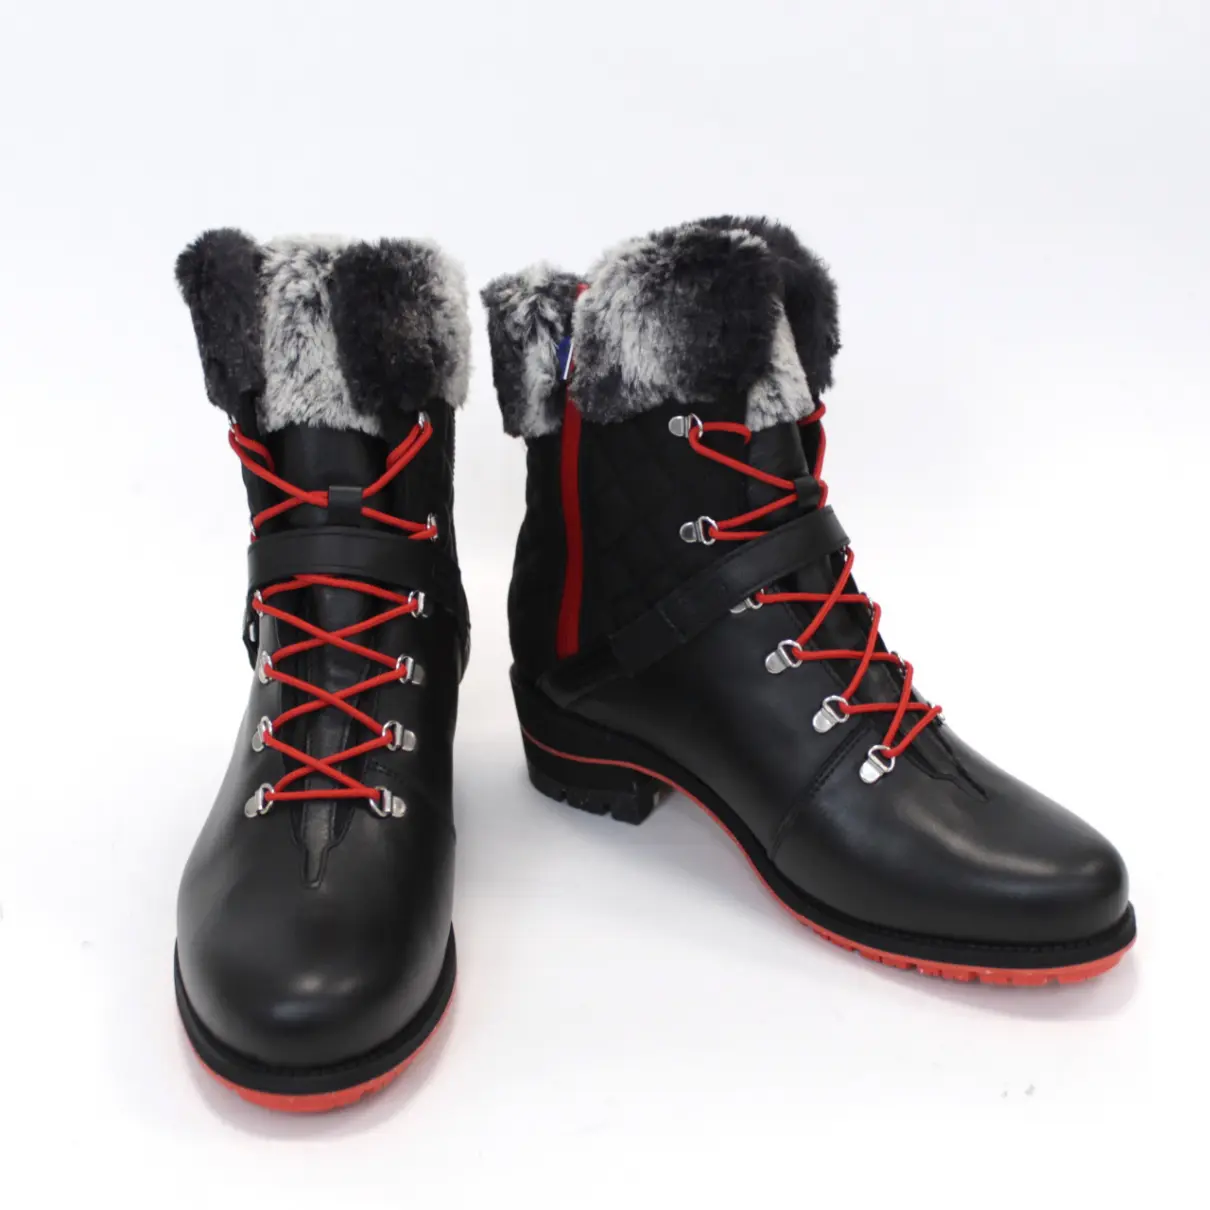 Buy Rossignol Leather snow boots online